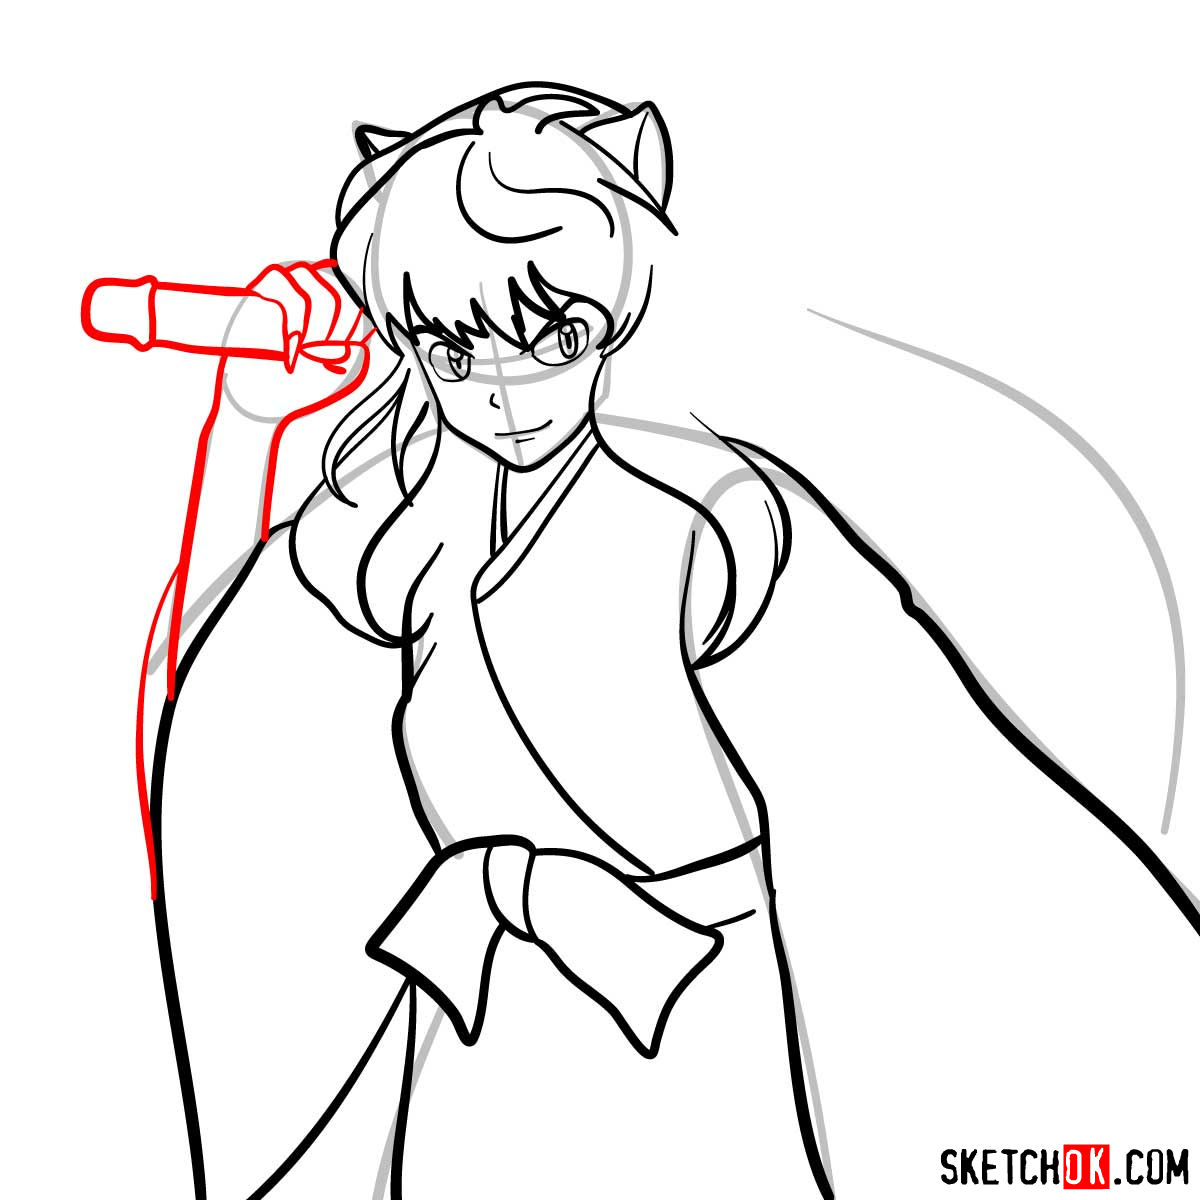 How to draw Inuyasha - 12 steps tutorial - step 10